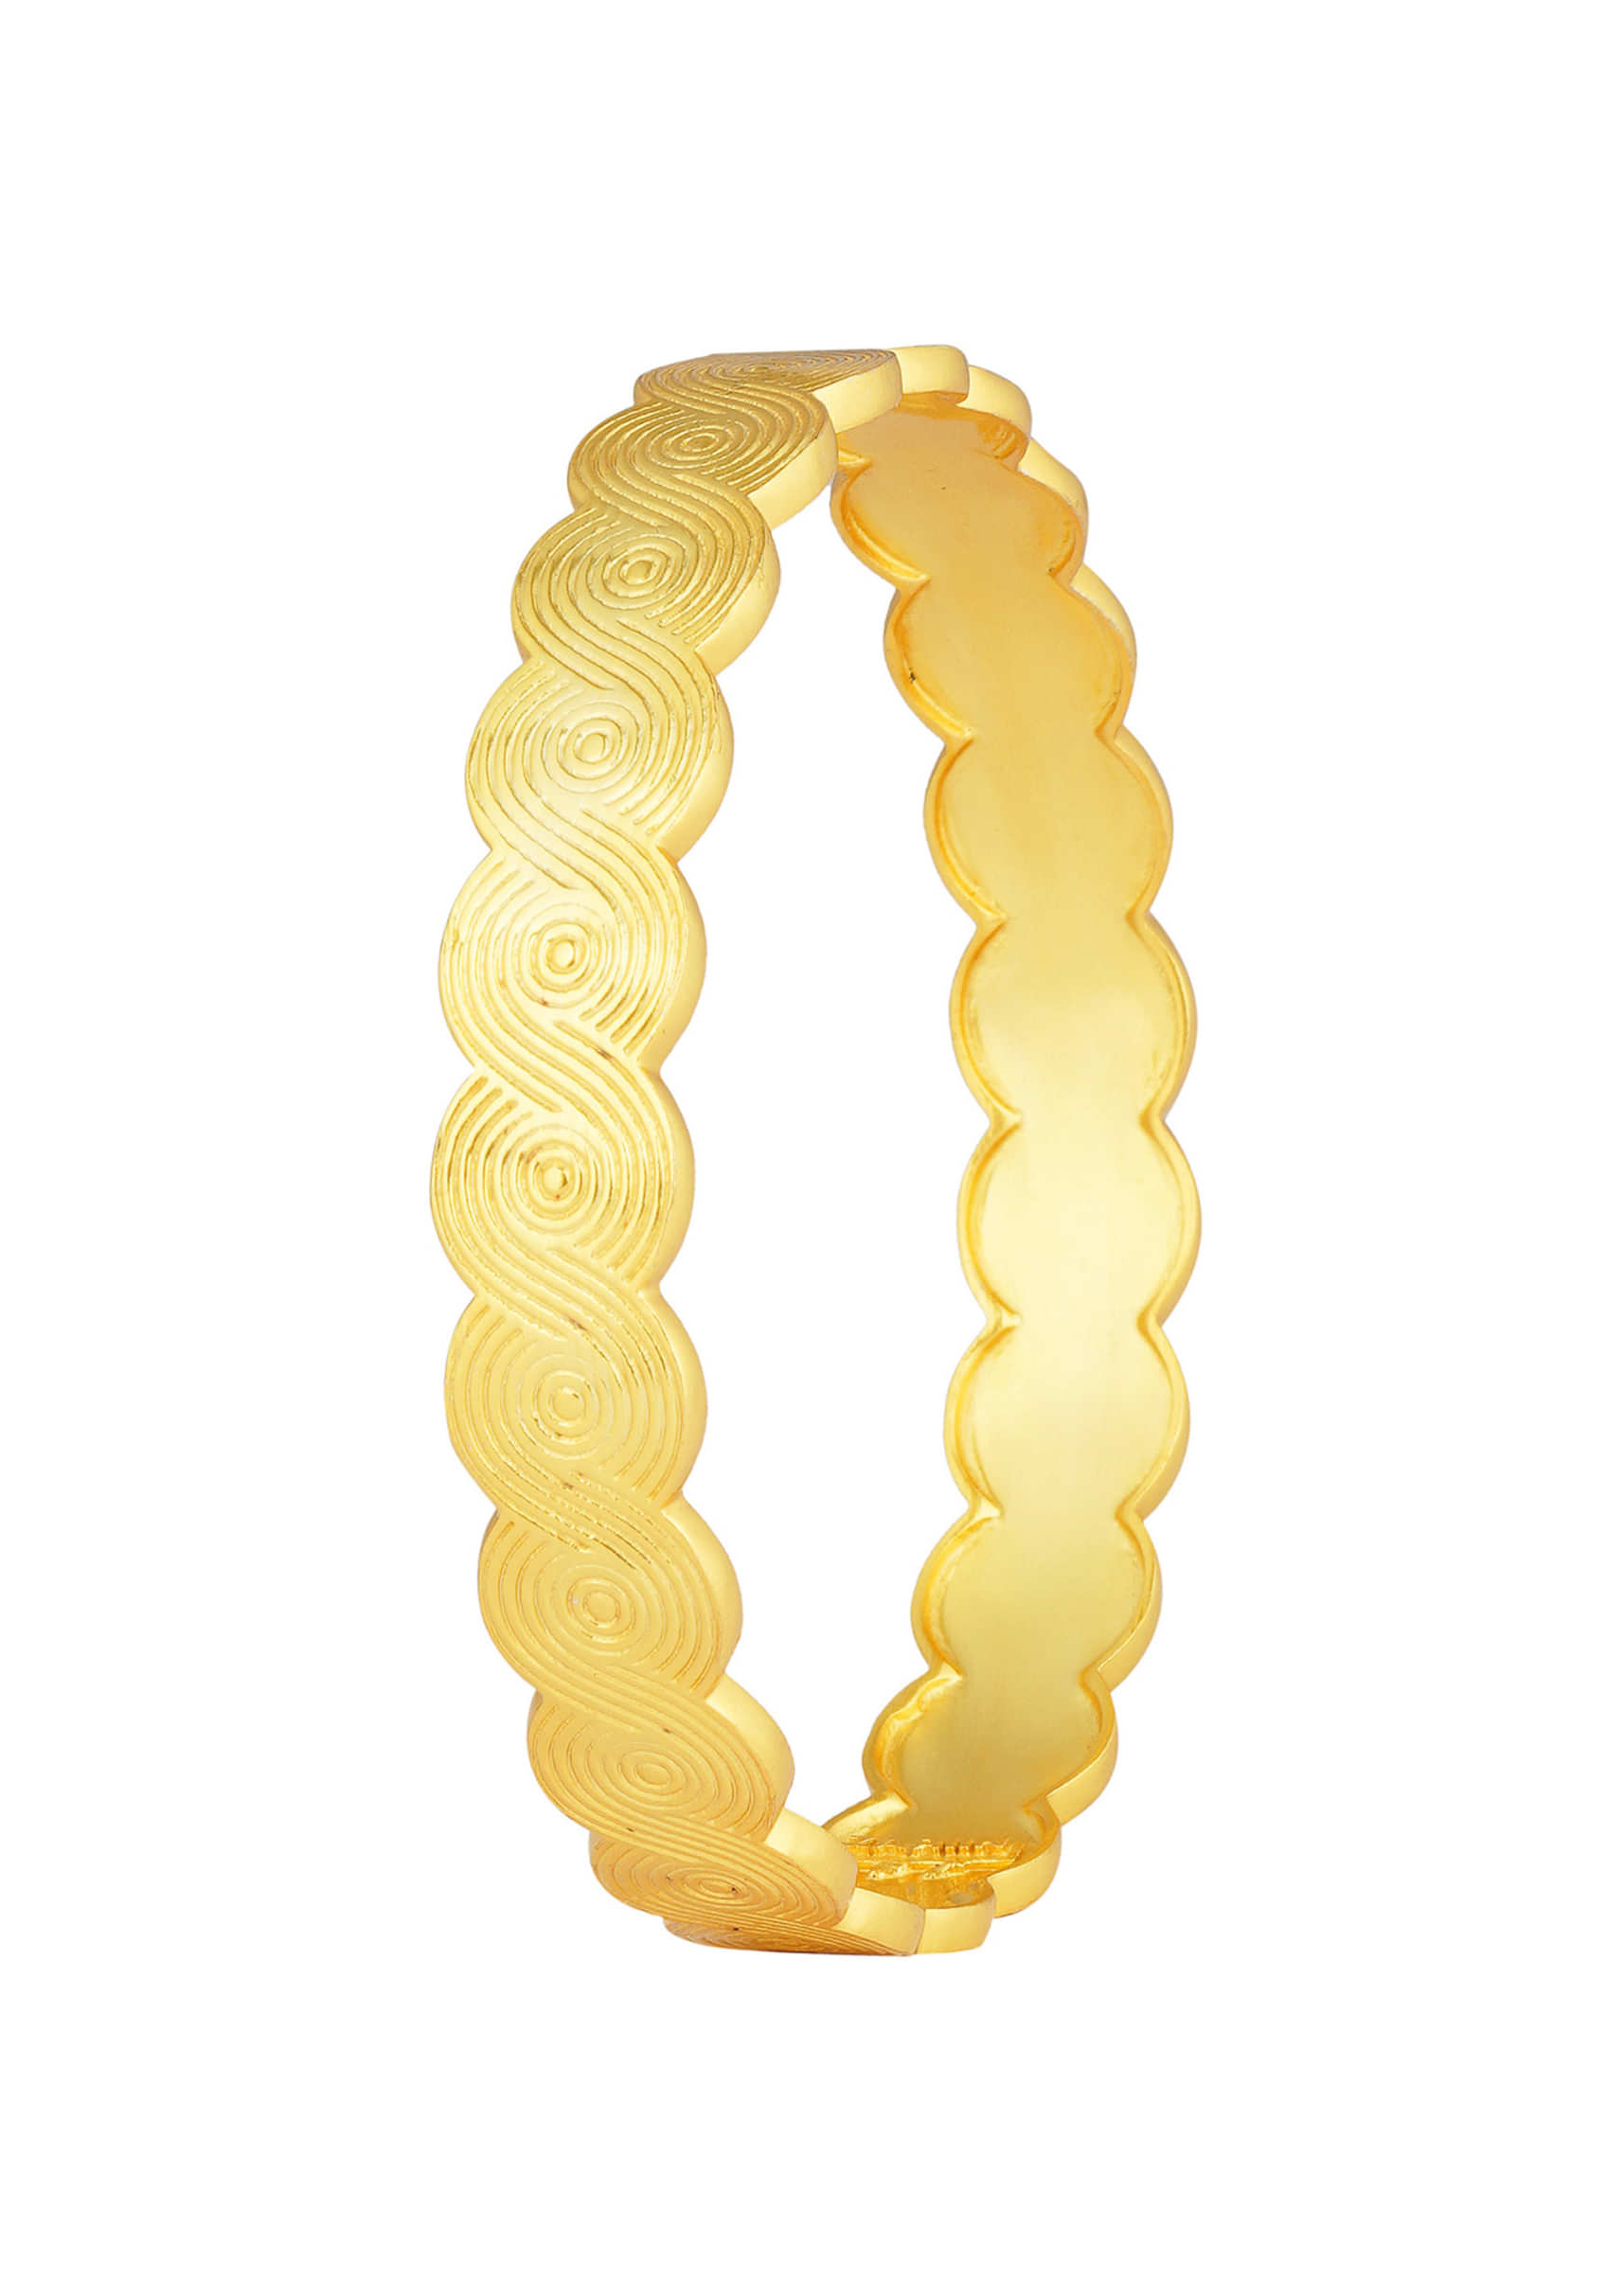 Gold Plated Adjustable Bangle With A Minimalistic Carved Design